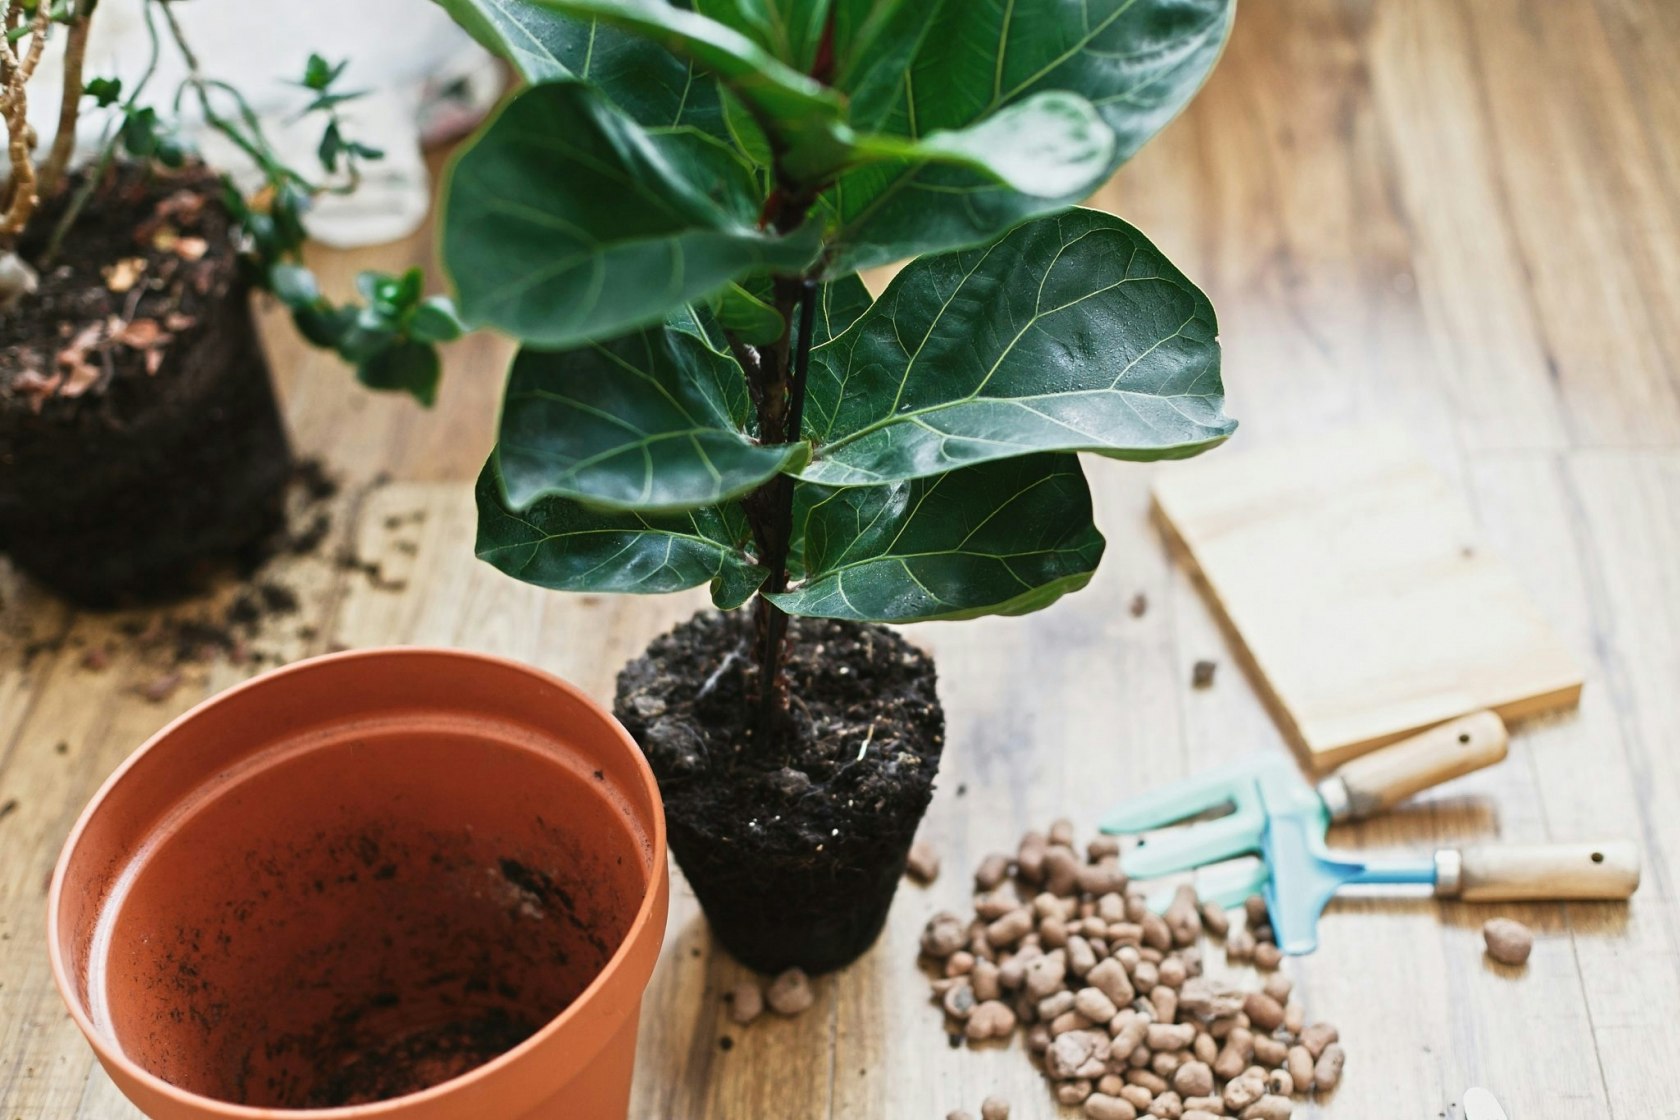 How and when to repot a plant, according to a houseplant expert